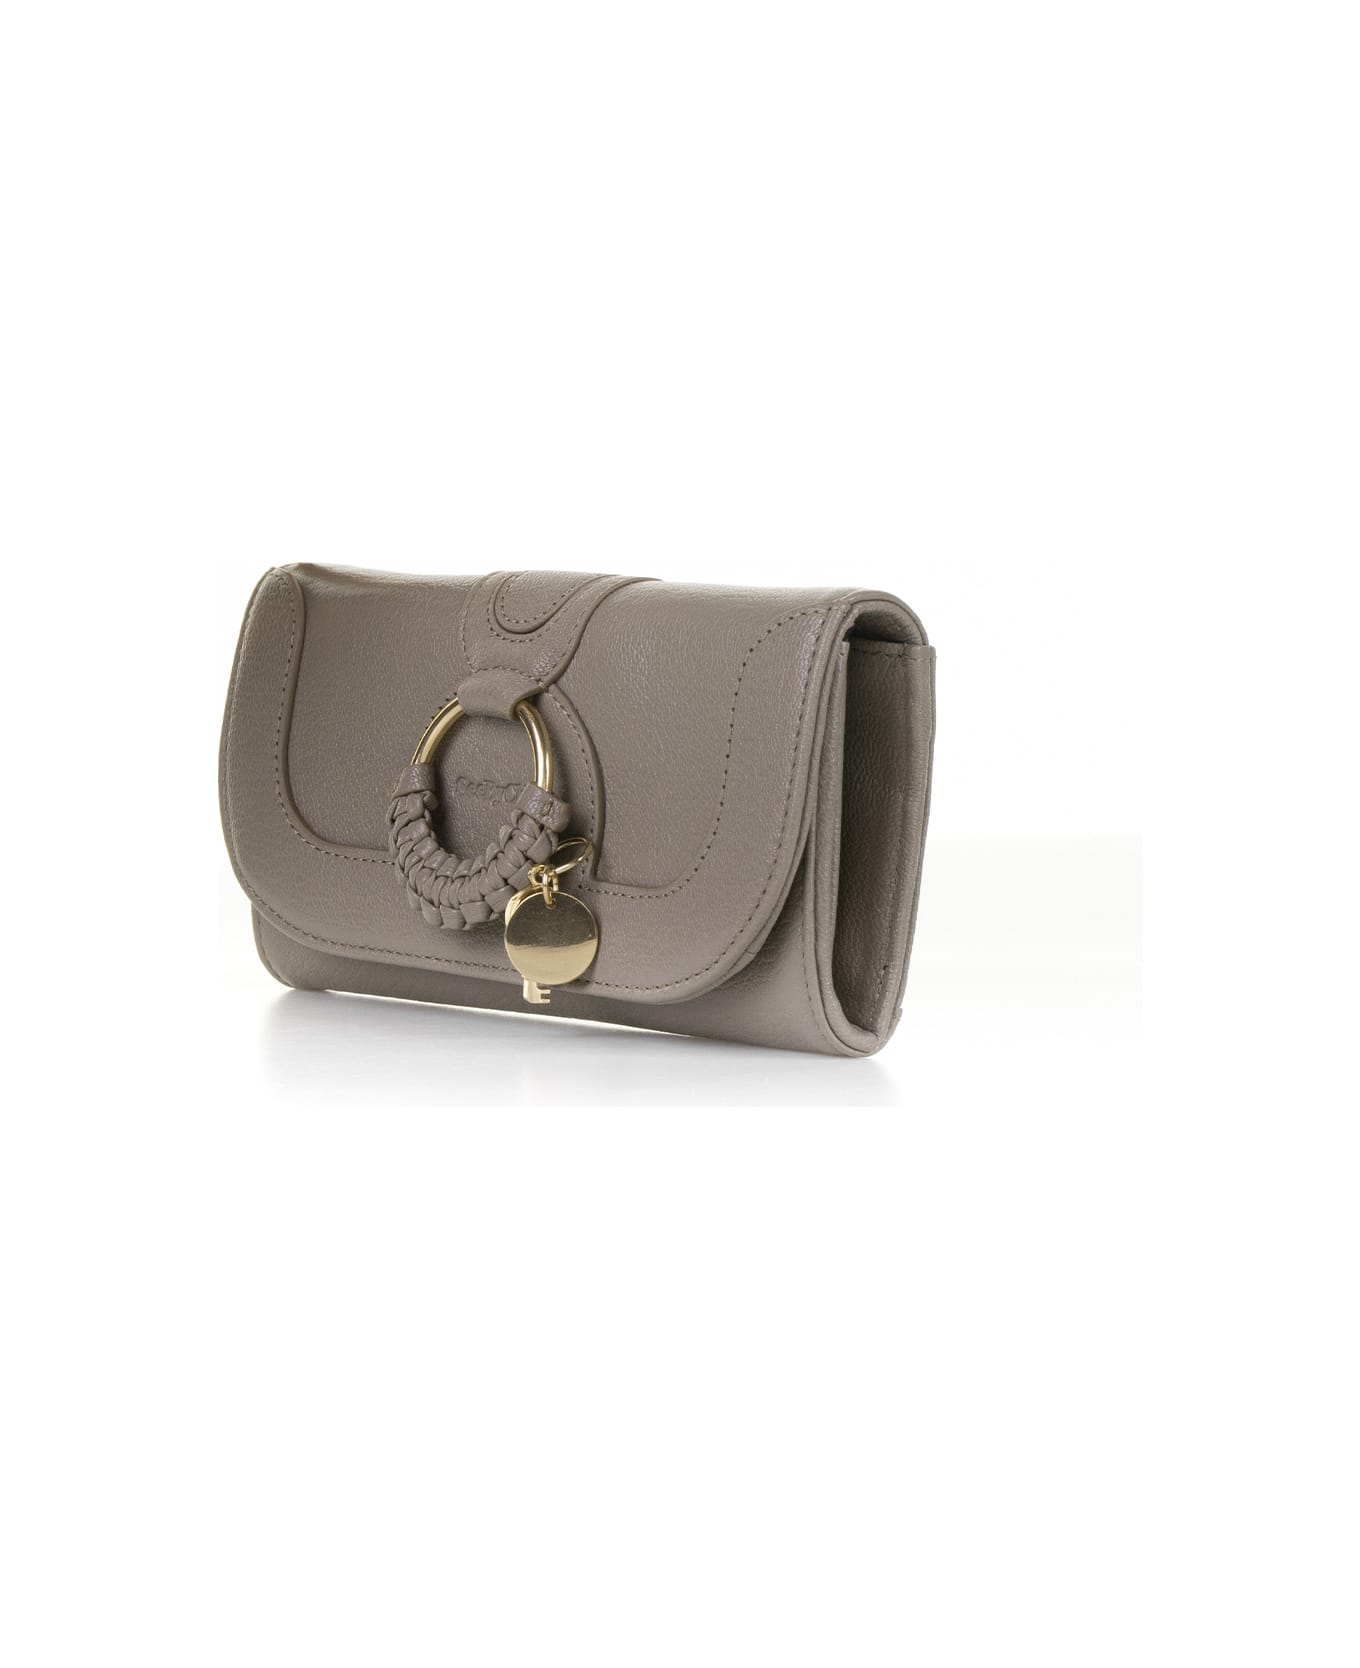 See by Chloé Wallet - MOTTY GREY 財布